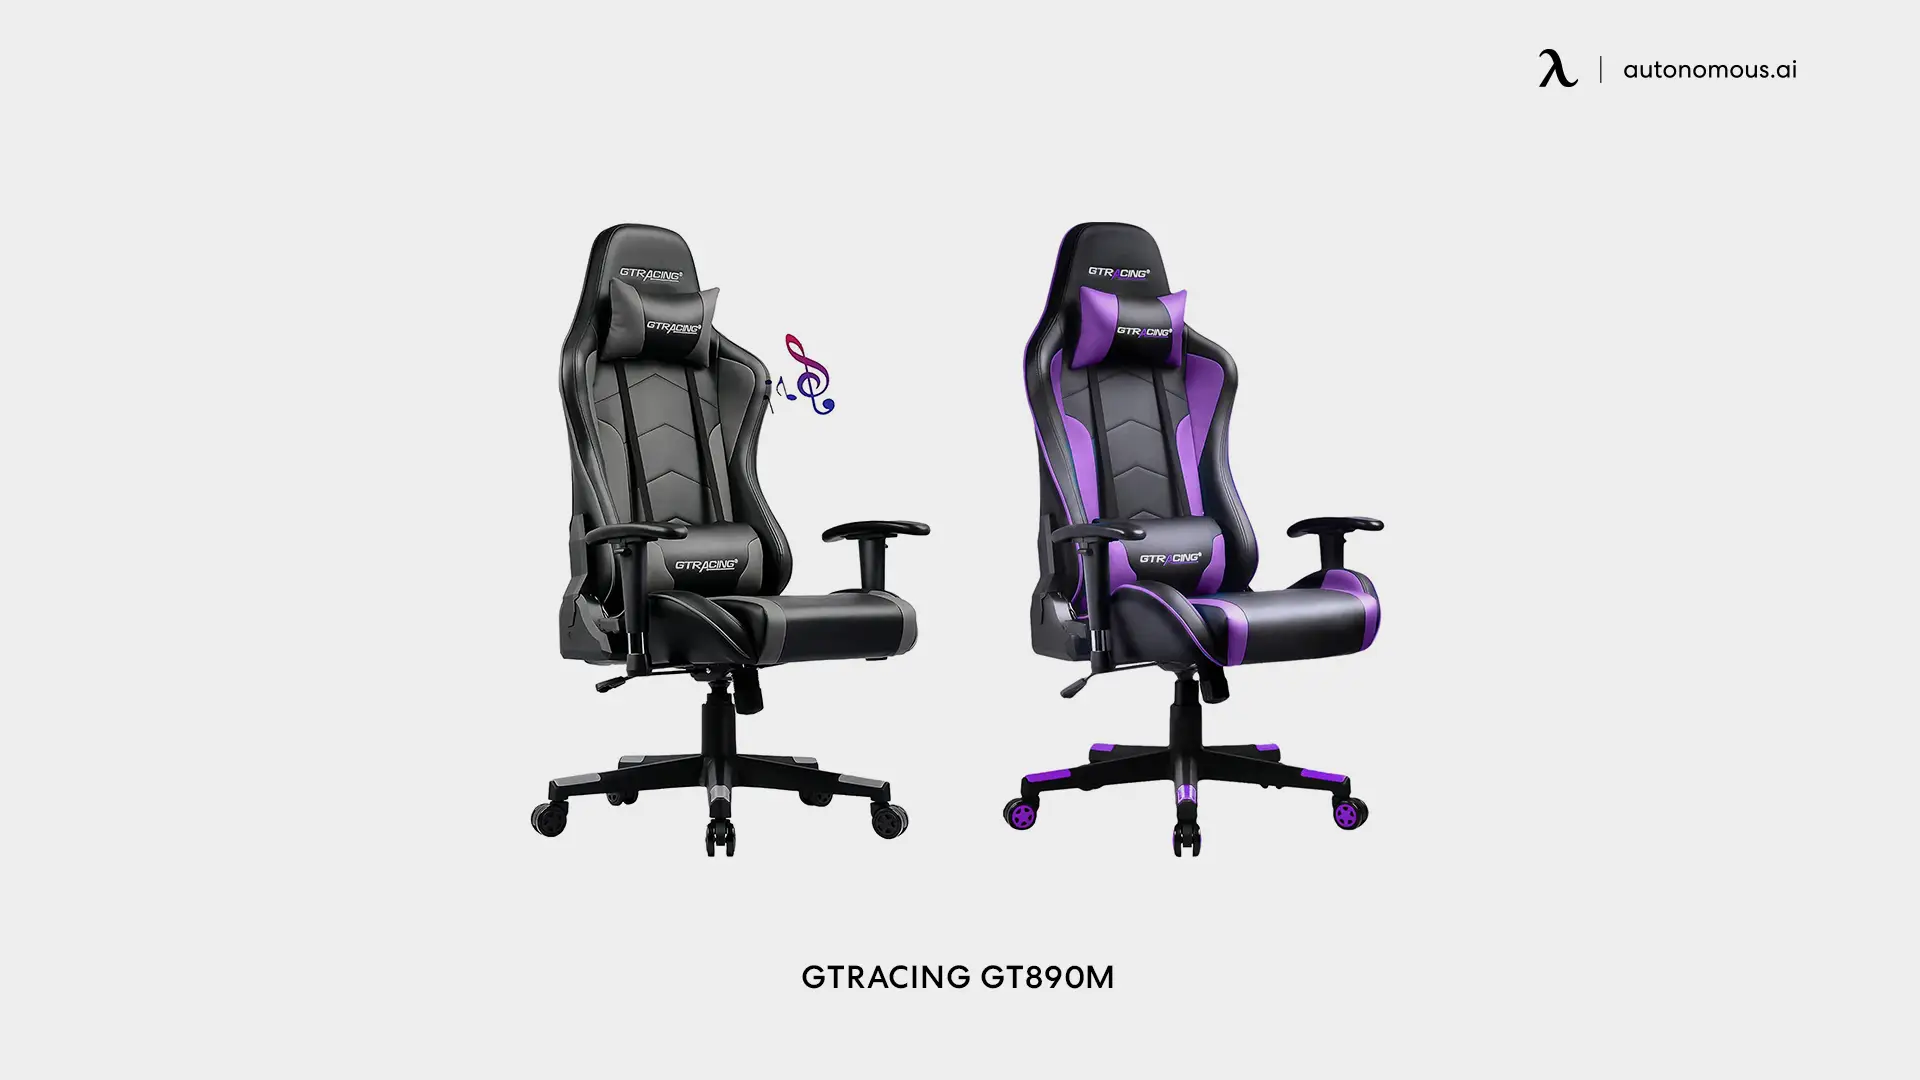 GTRACING GT890M Gaming Chair